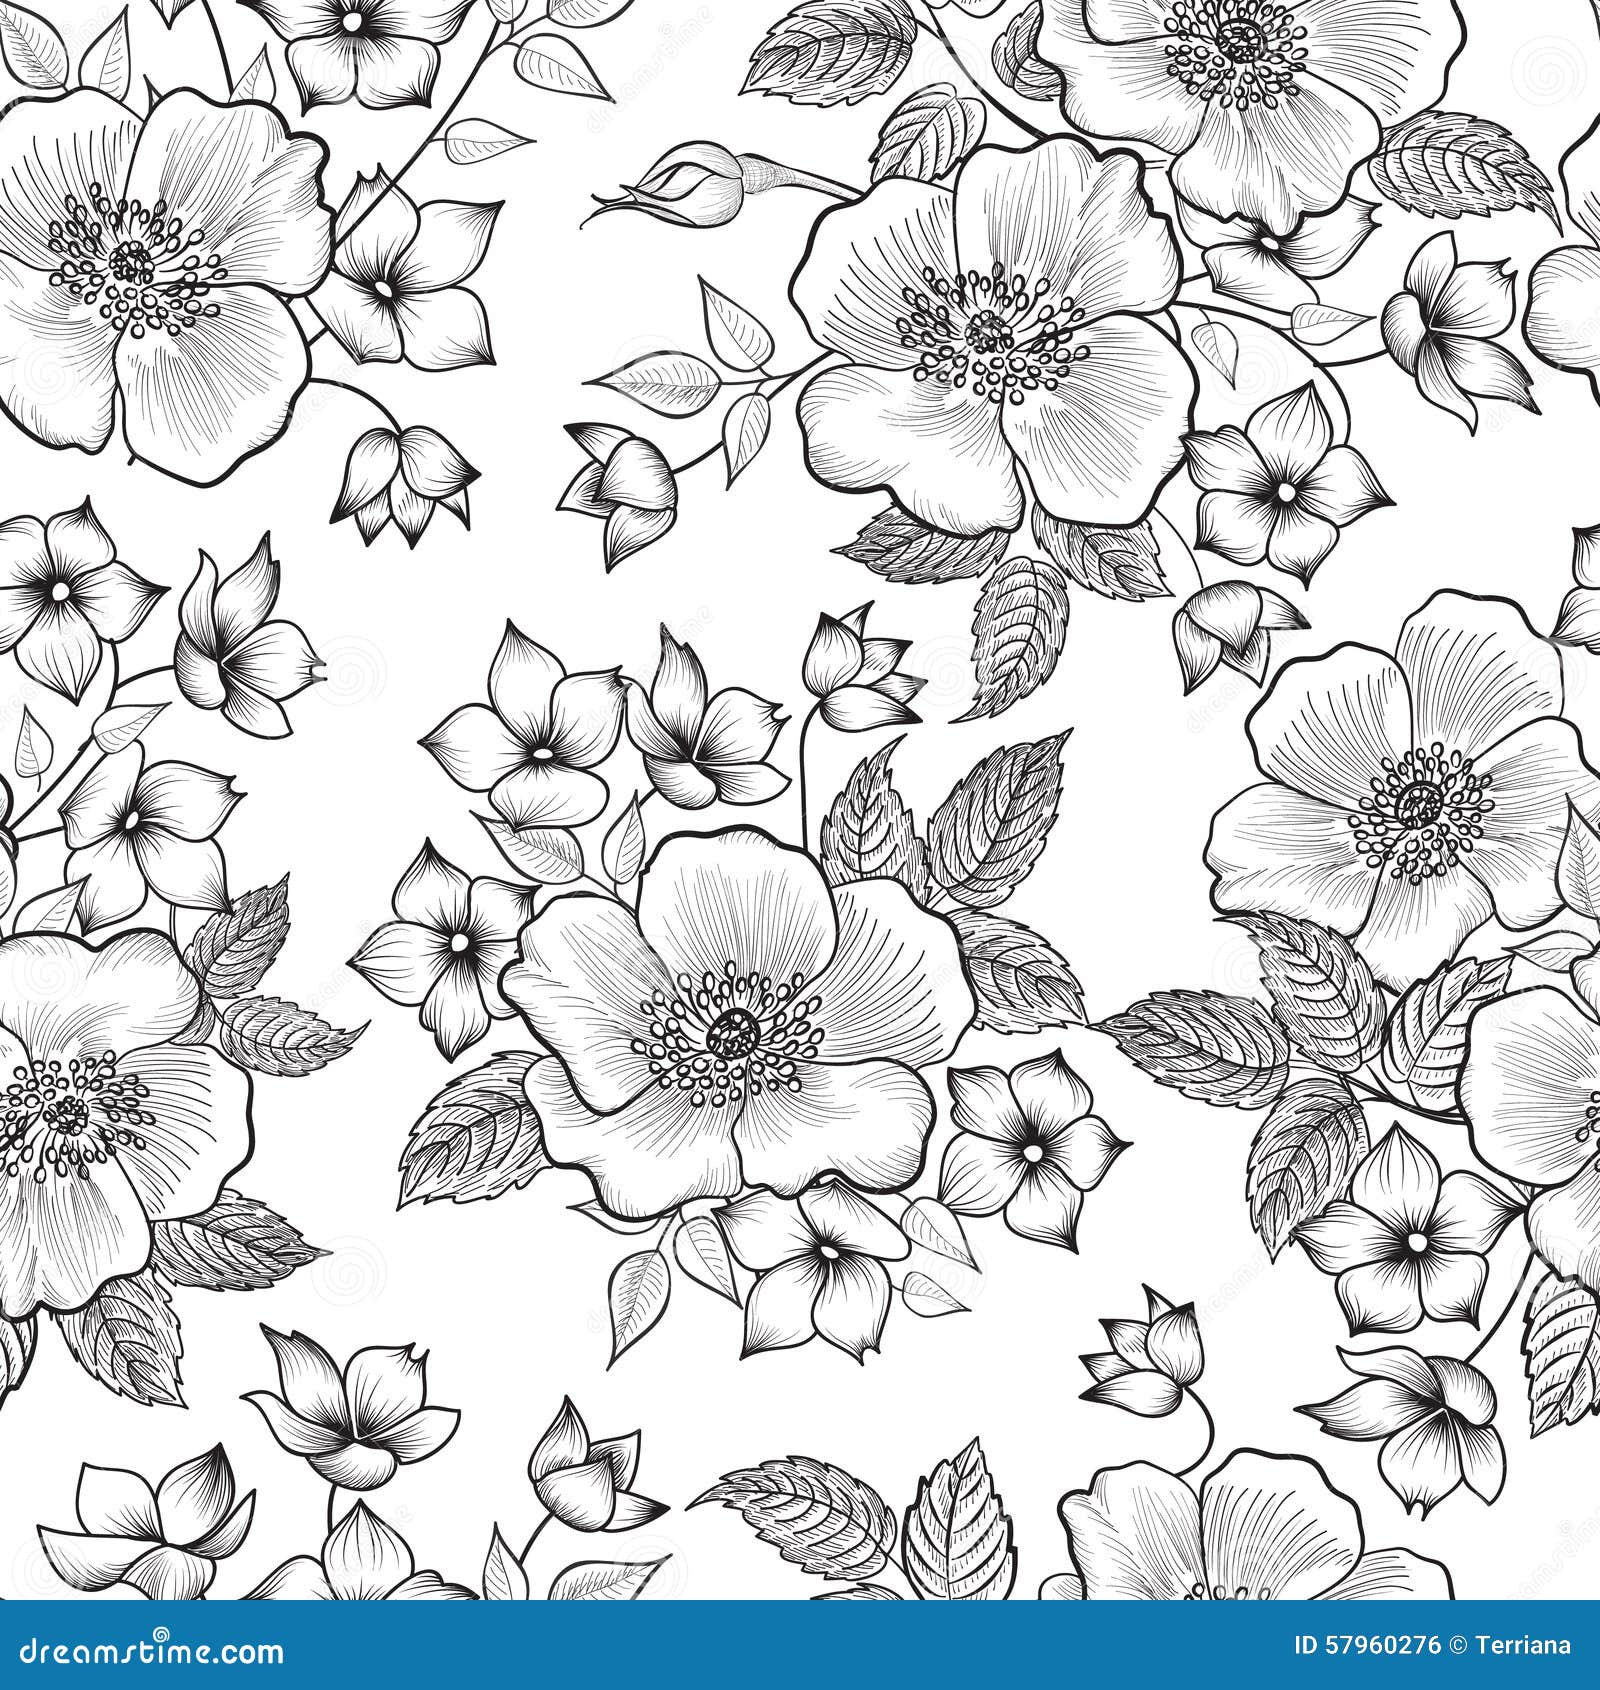 Flower Sketch Vector Art Icons and Graphics for Free Download